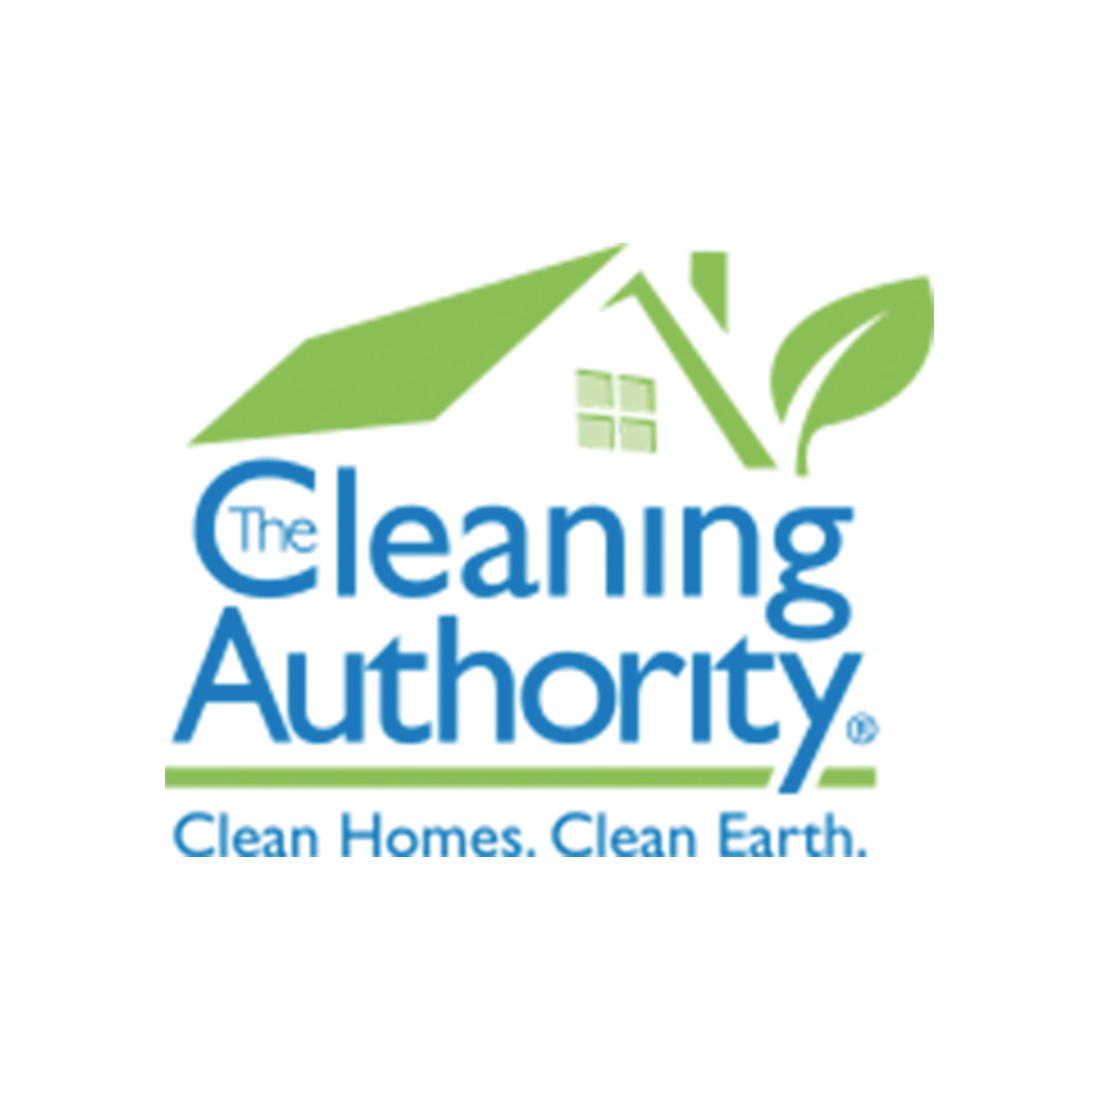 The Cleaning Authority 